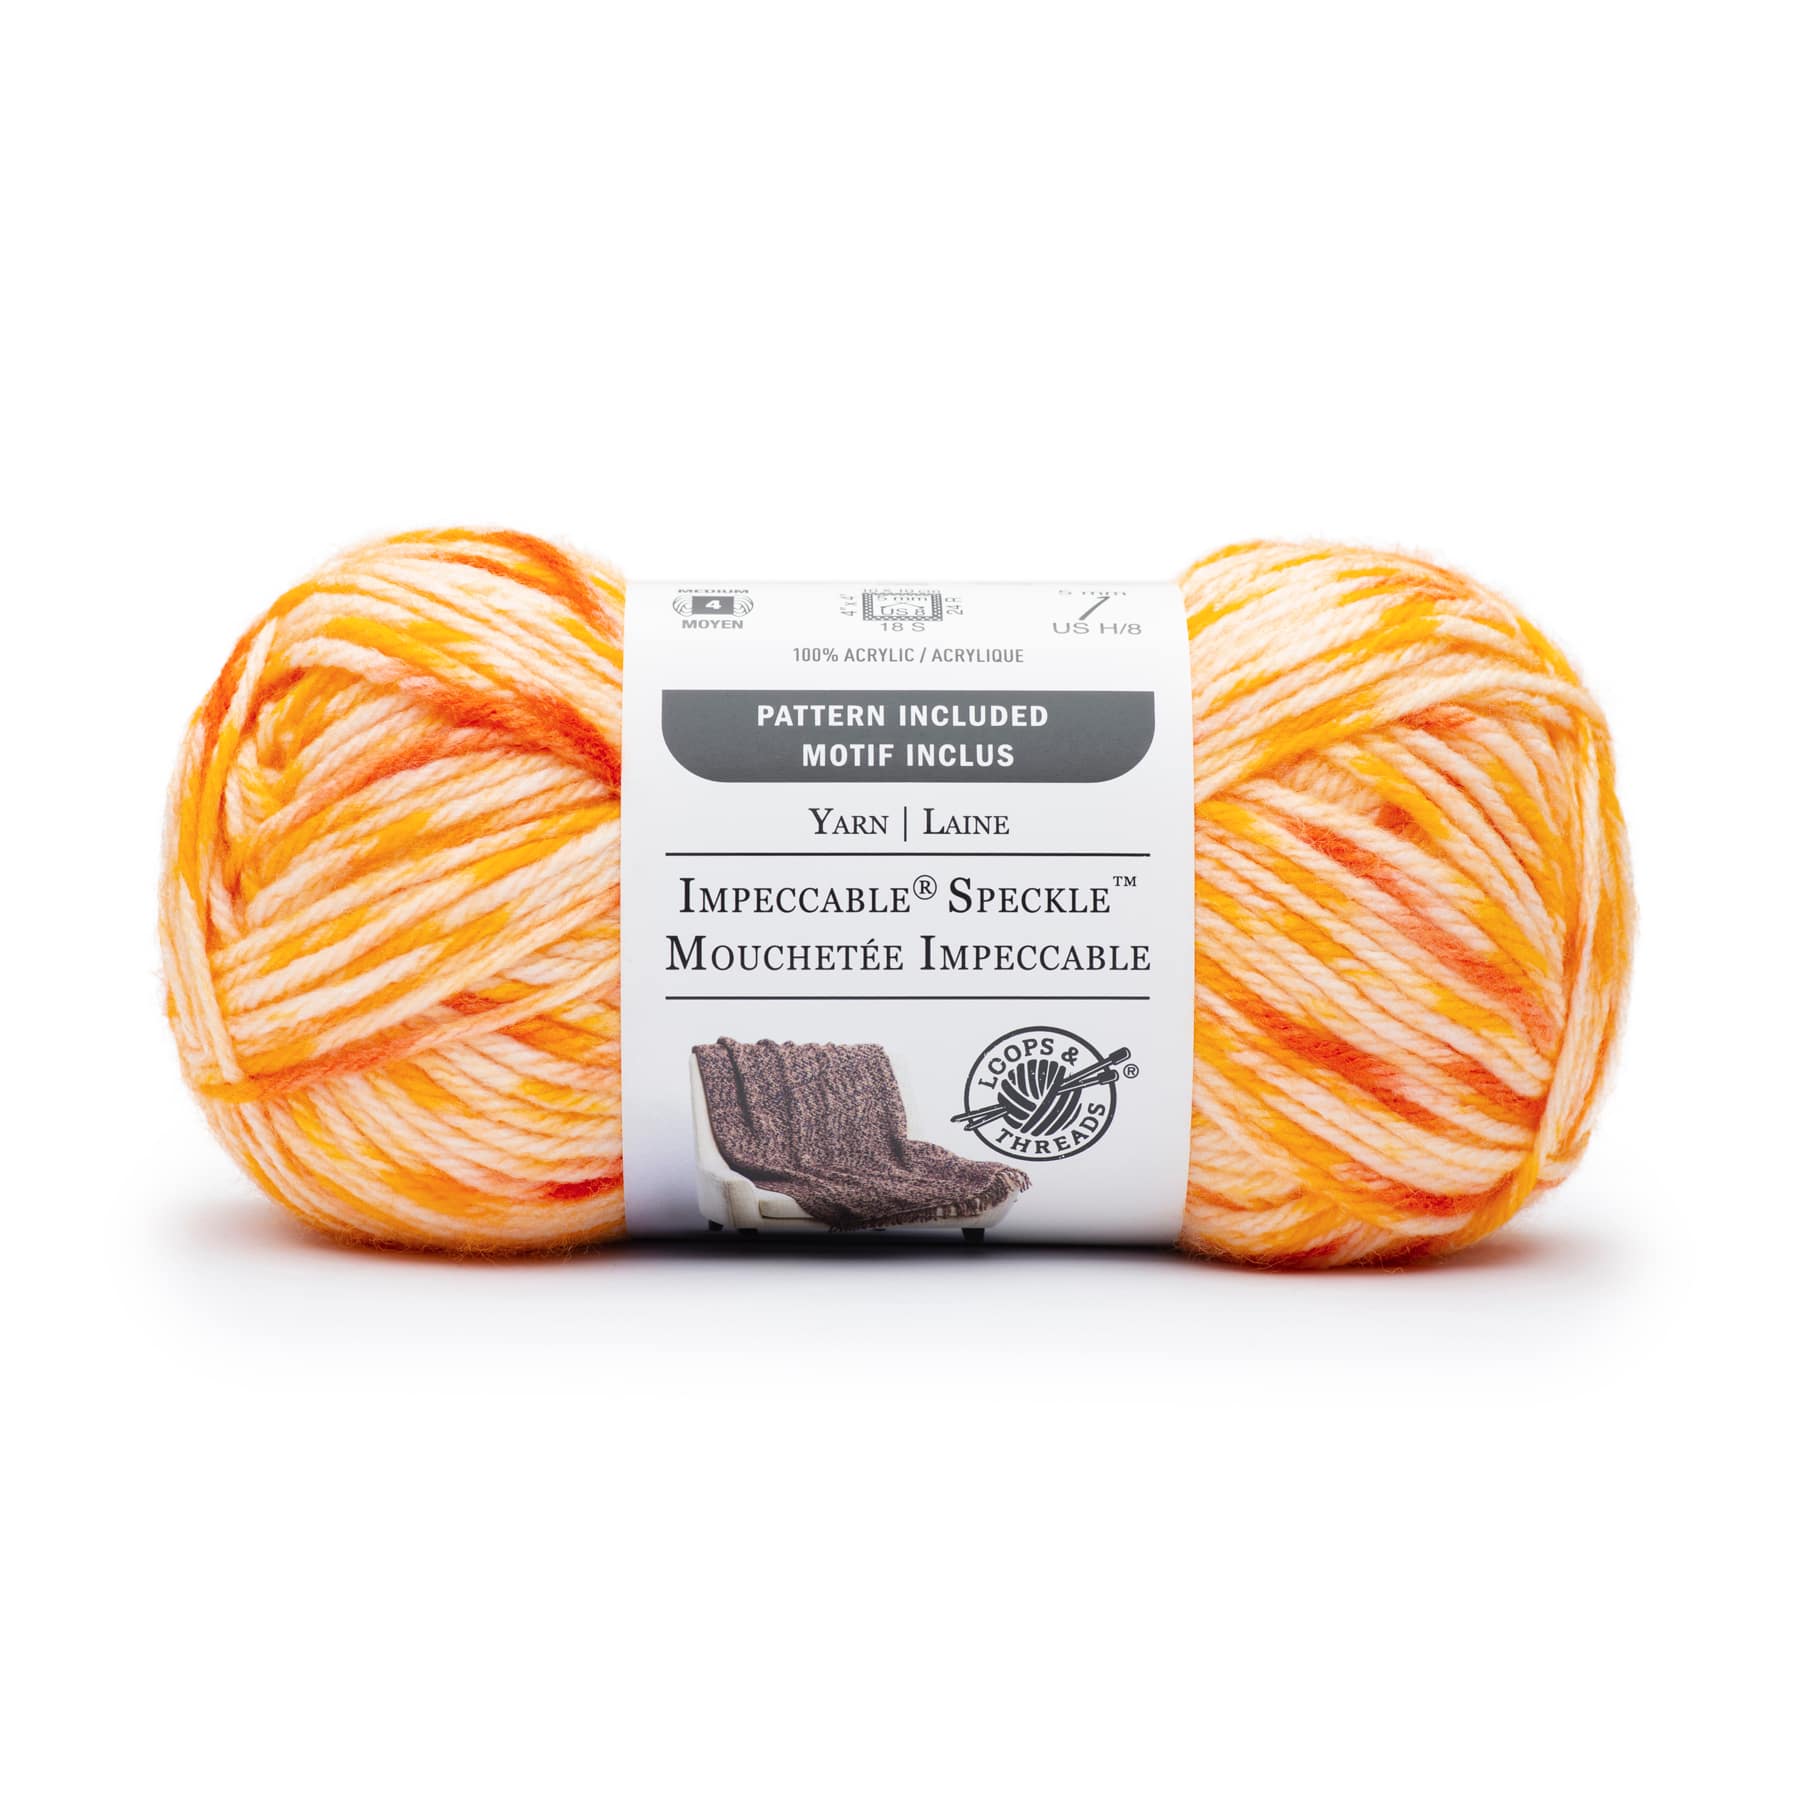 Michael's Yarn Sale Review & Unboxing Yarn & Giveaway! (Ends July 26 th) 